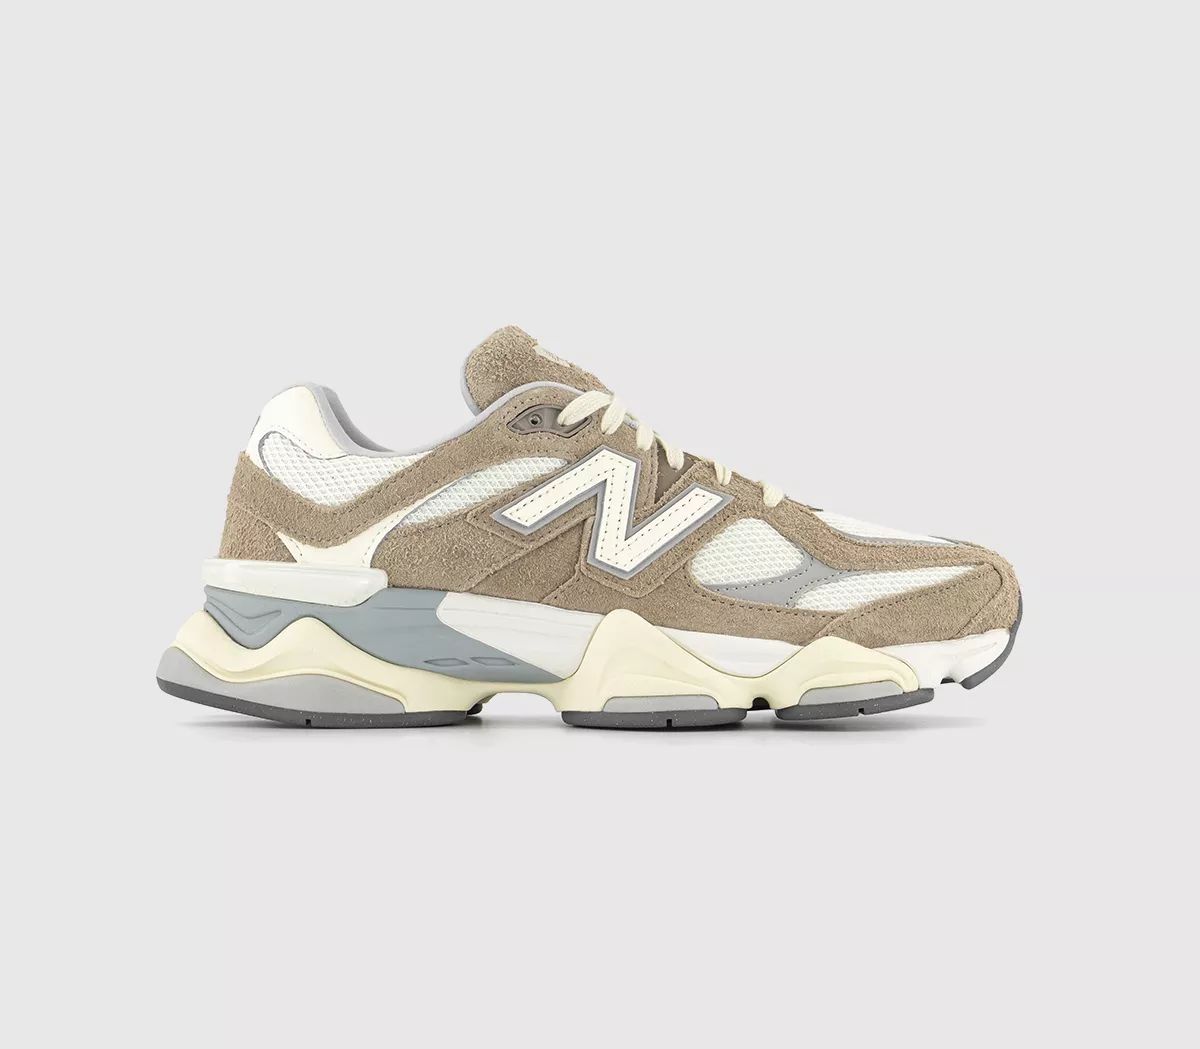 New Balance 9060 Trainers Driftwood - Men's Trainers | Offspring (UK)